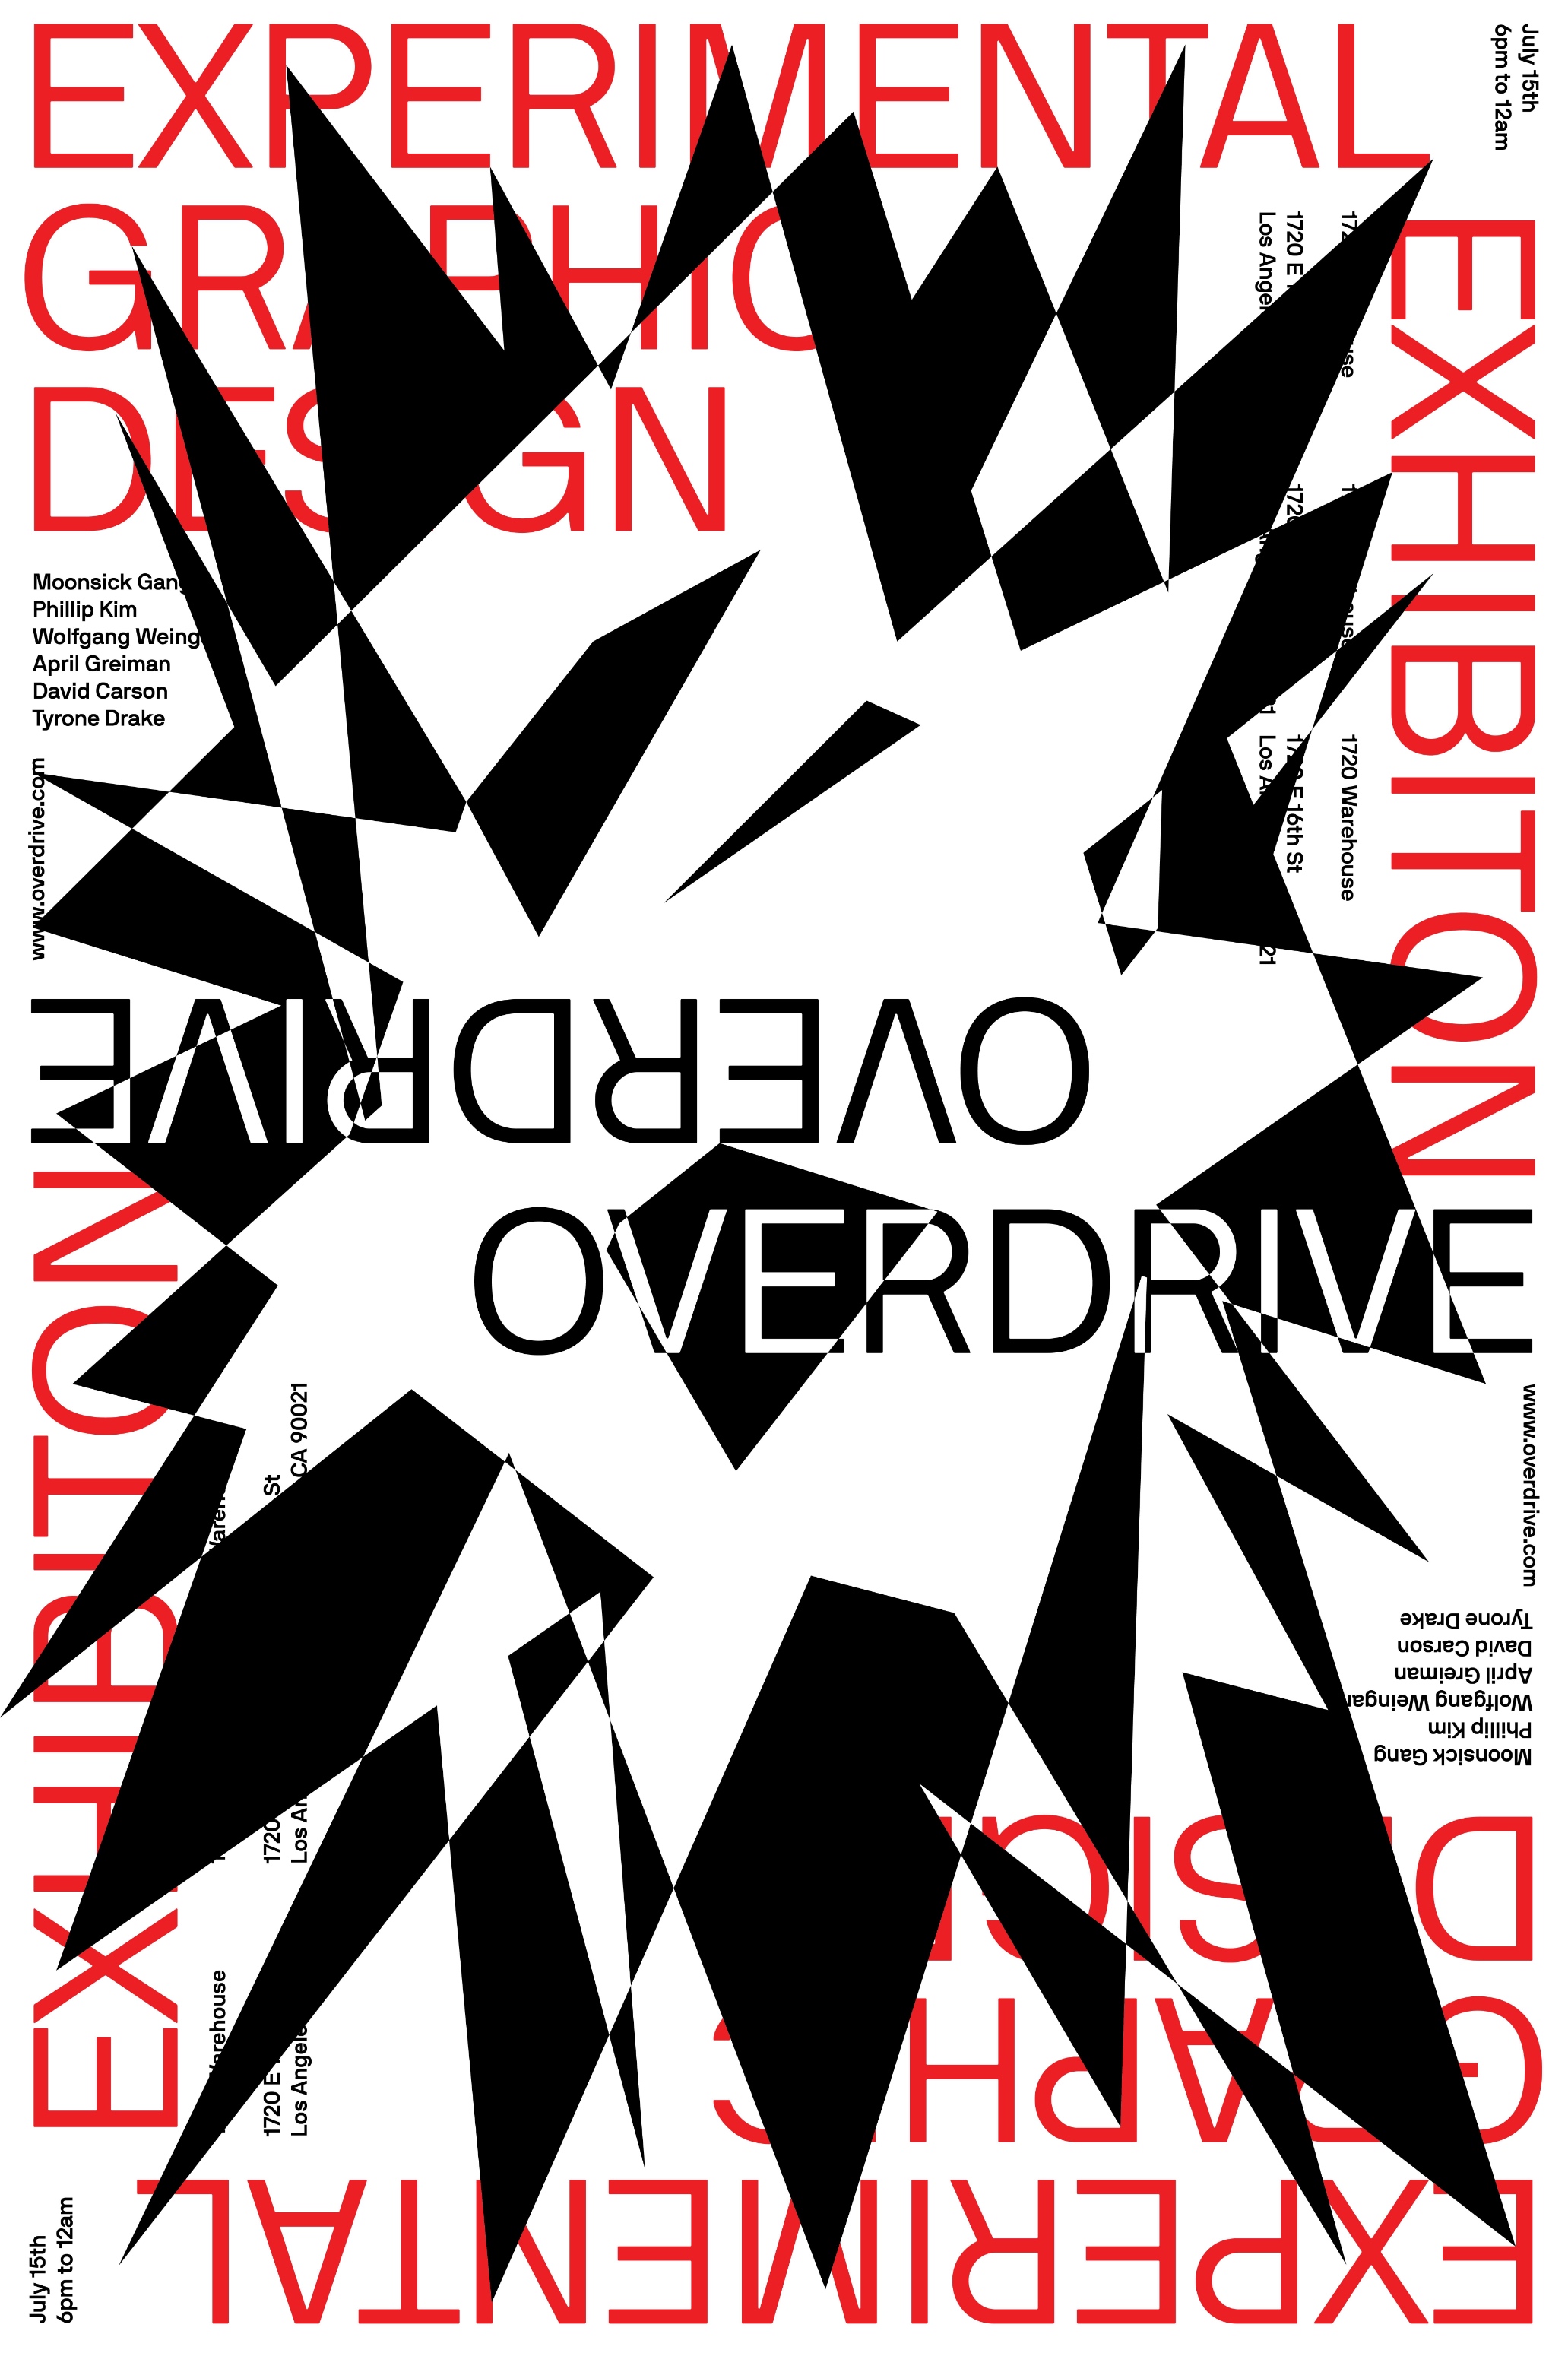 Overdrive: Experimental Graphic Design Exhibition Poster Series